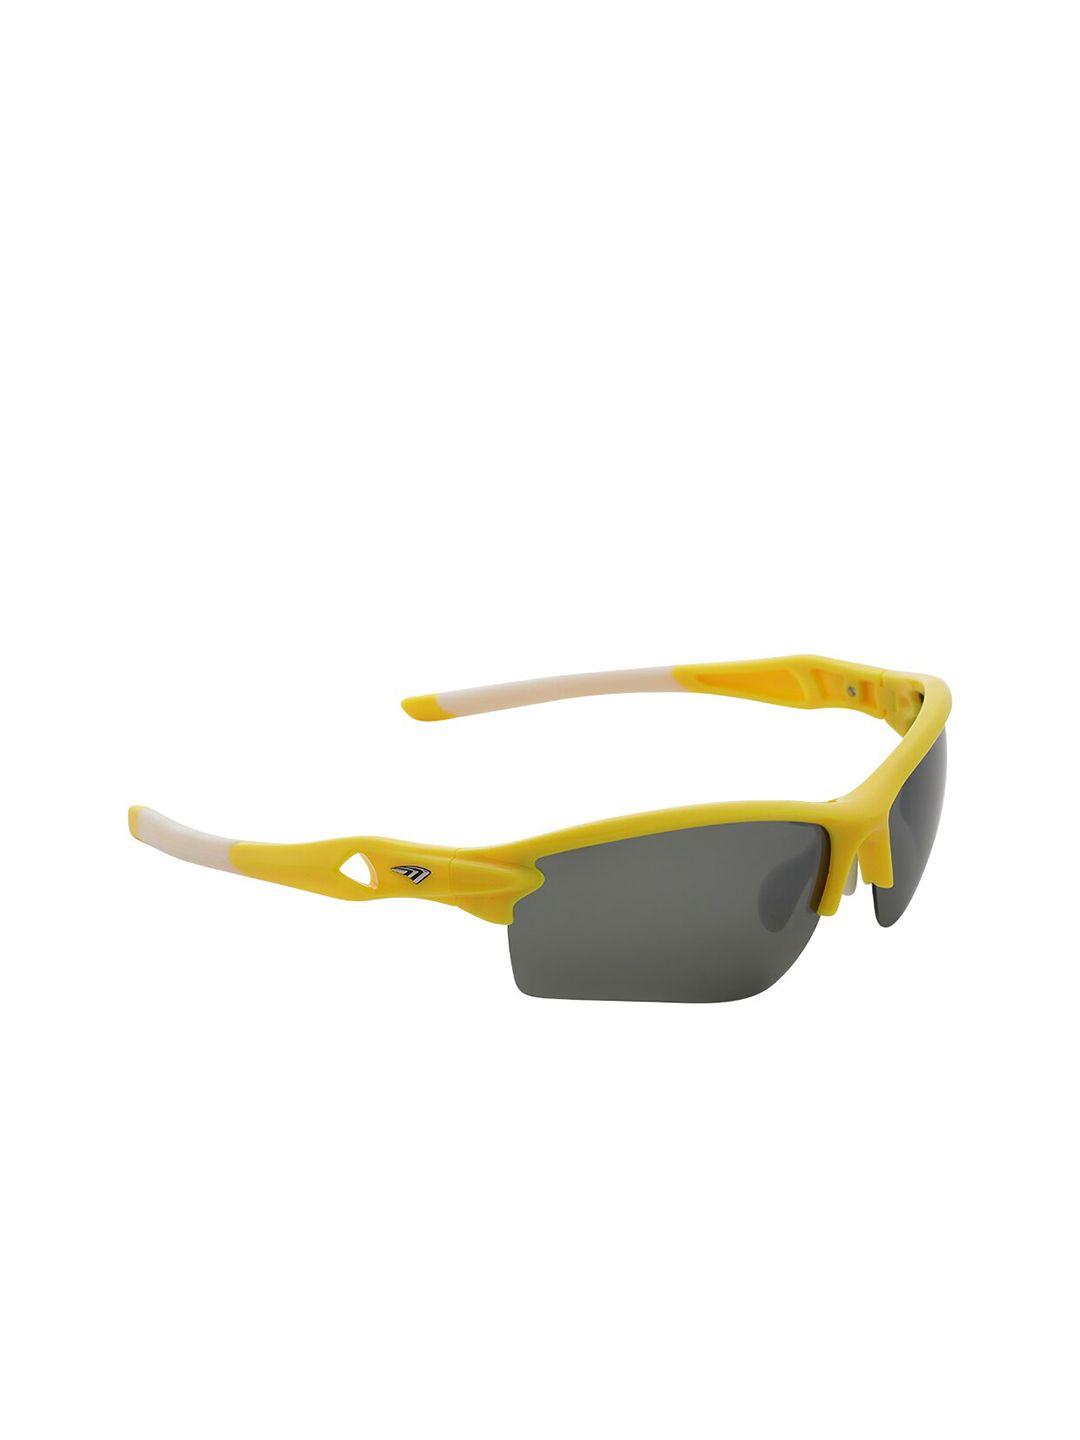 charles london men grey lens & yellow sports sunglasses with uv protected lens